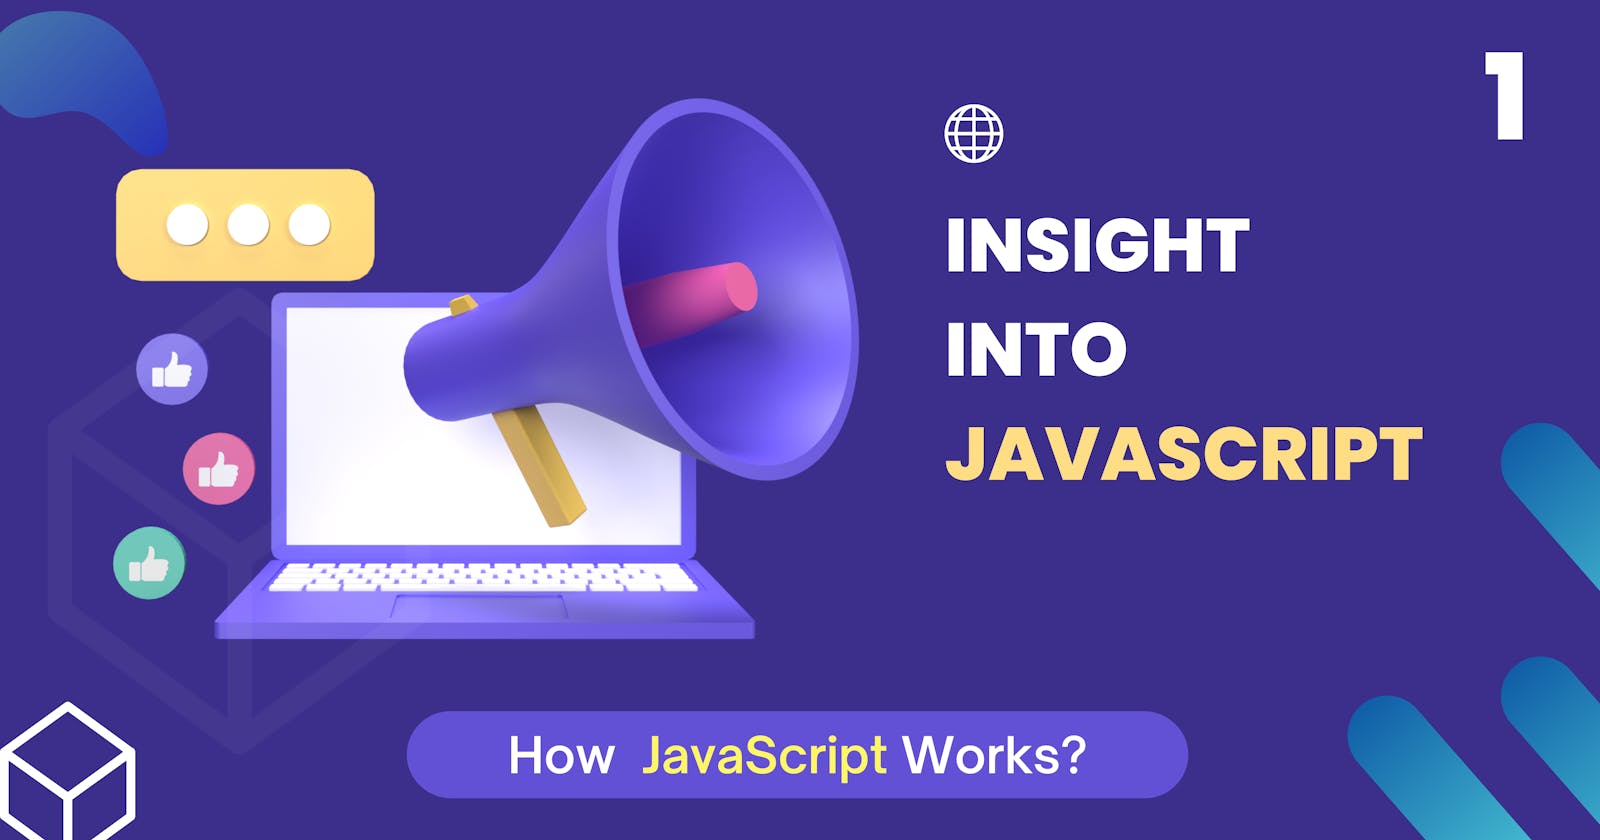 Chapter 1 - How does JavaScript Work Internally?